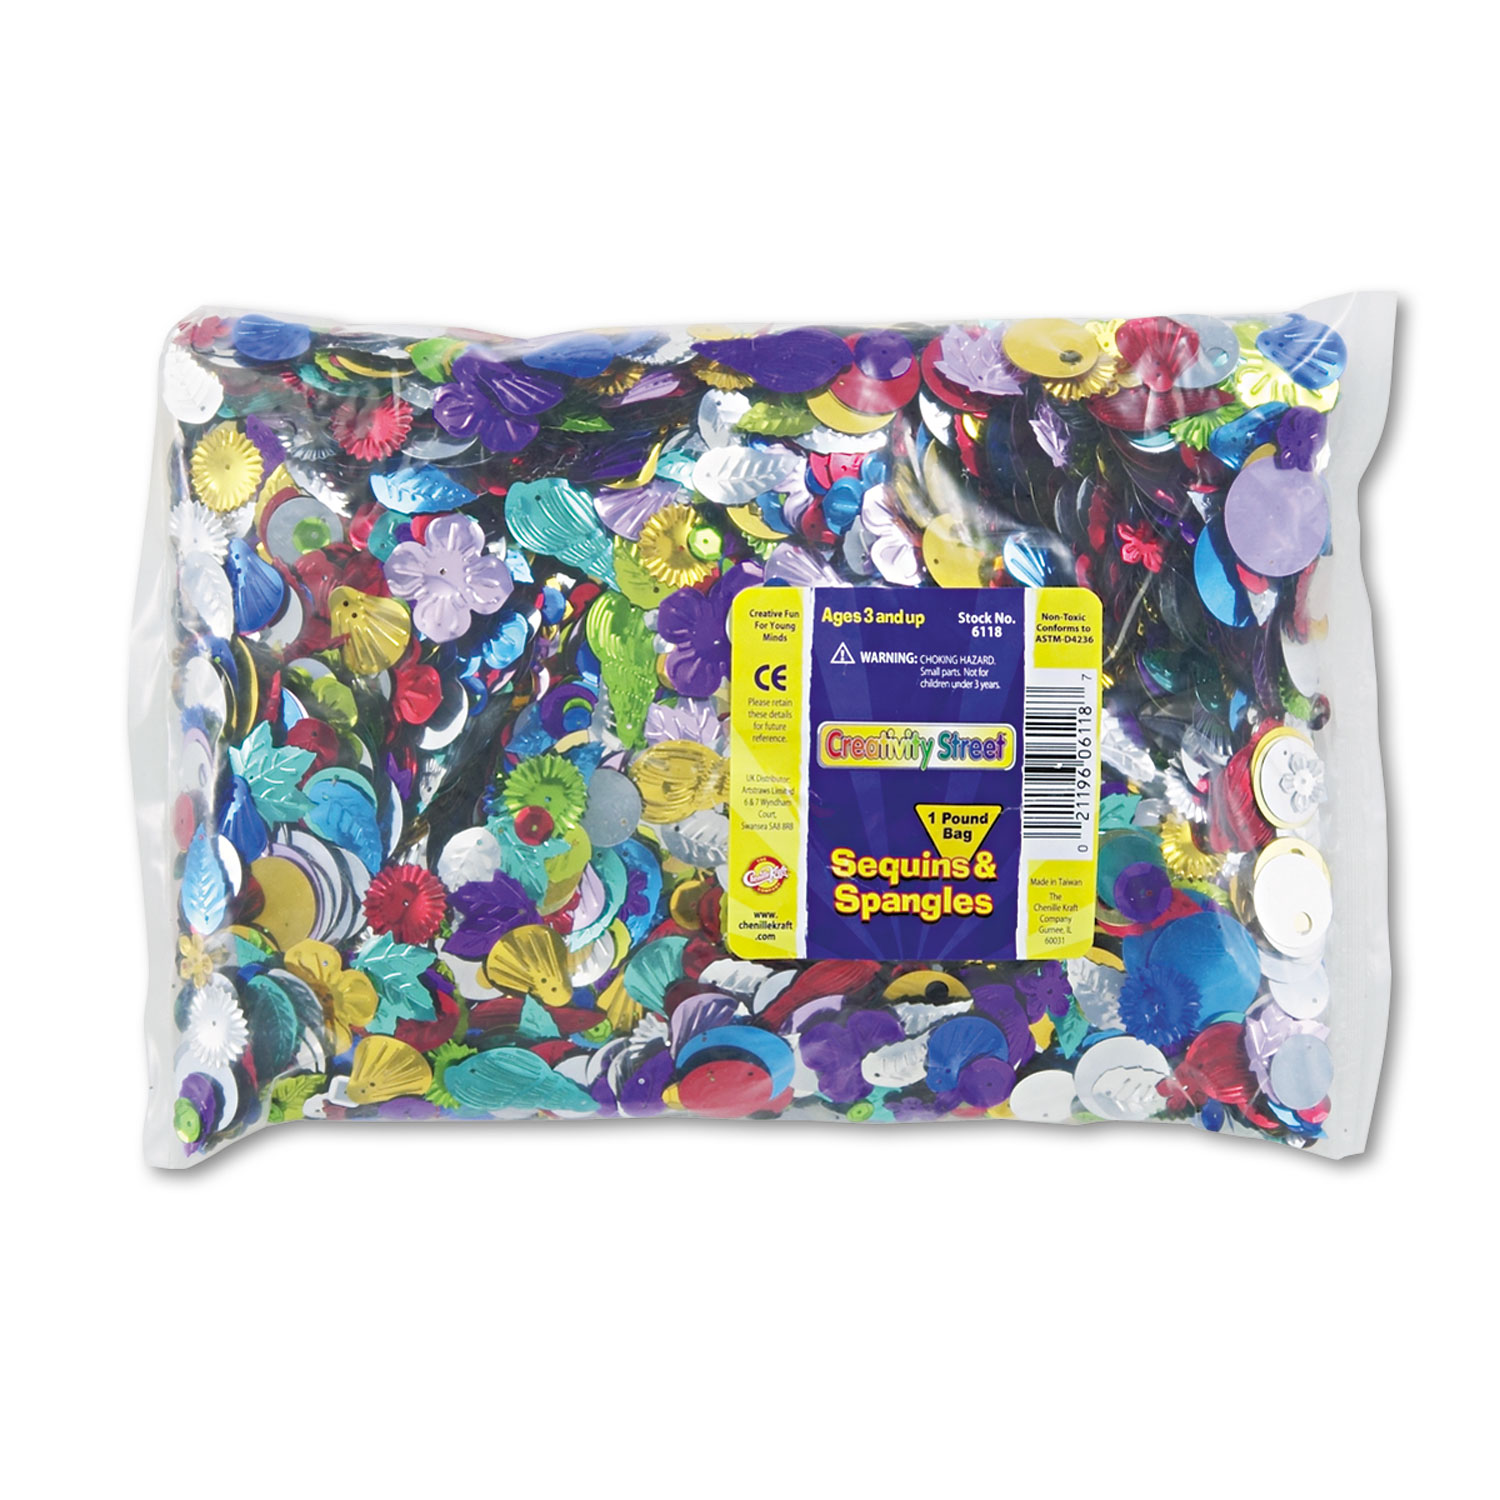 Sequins & Spangles Classroom Pack, Assorted Metallic Colors, 1 lb/Pack